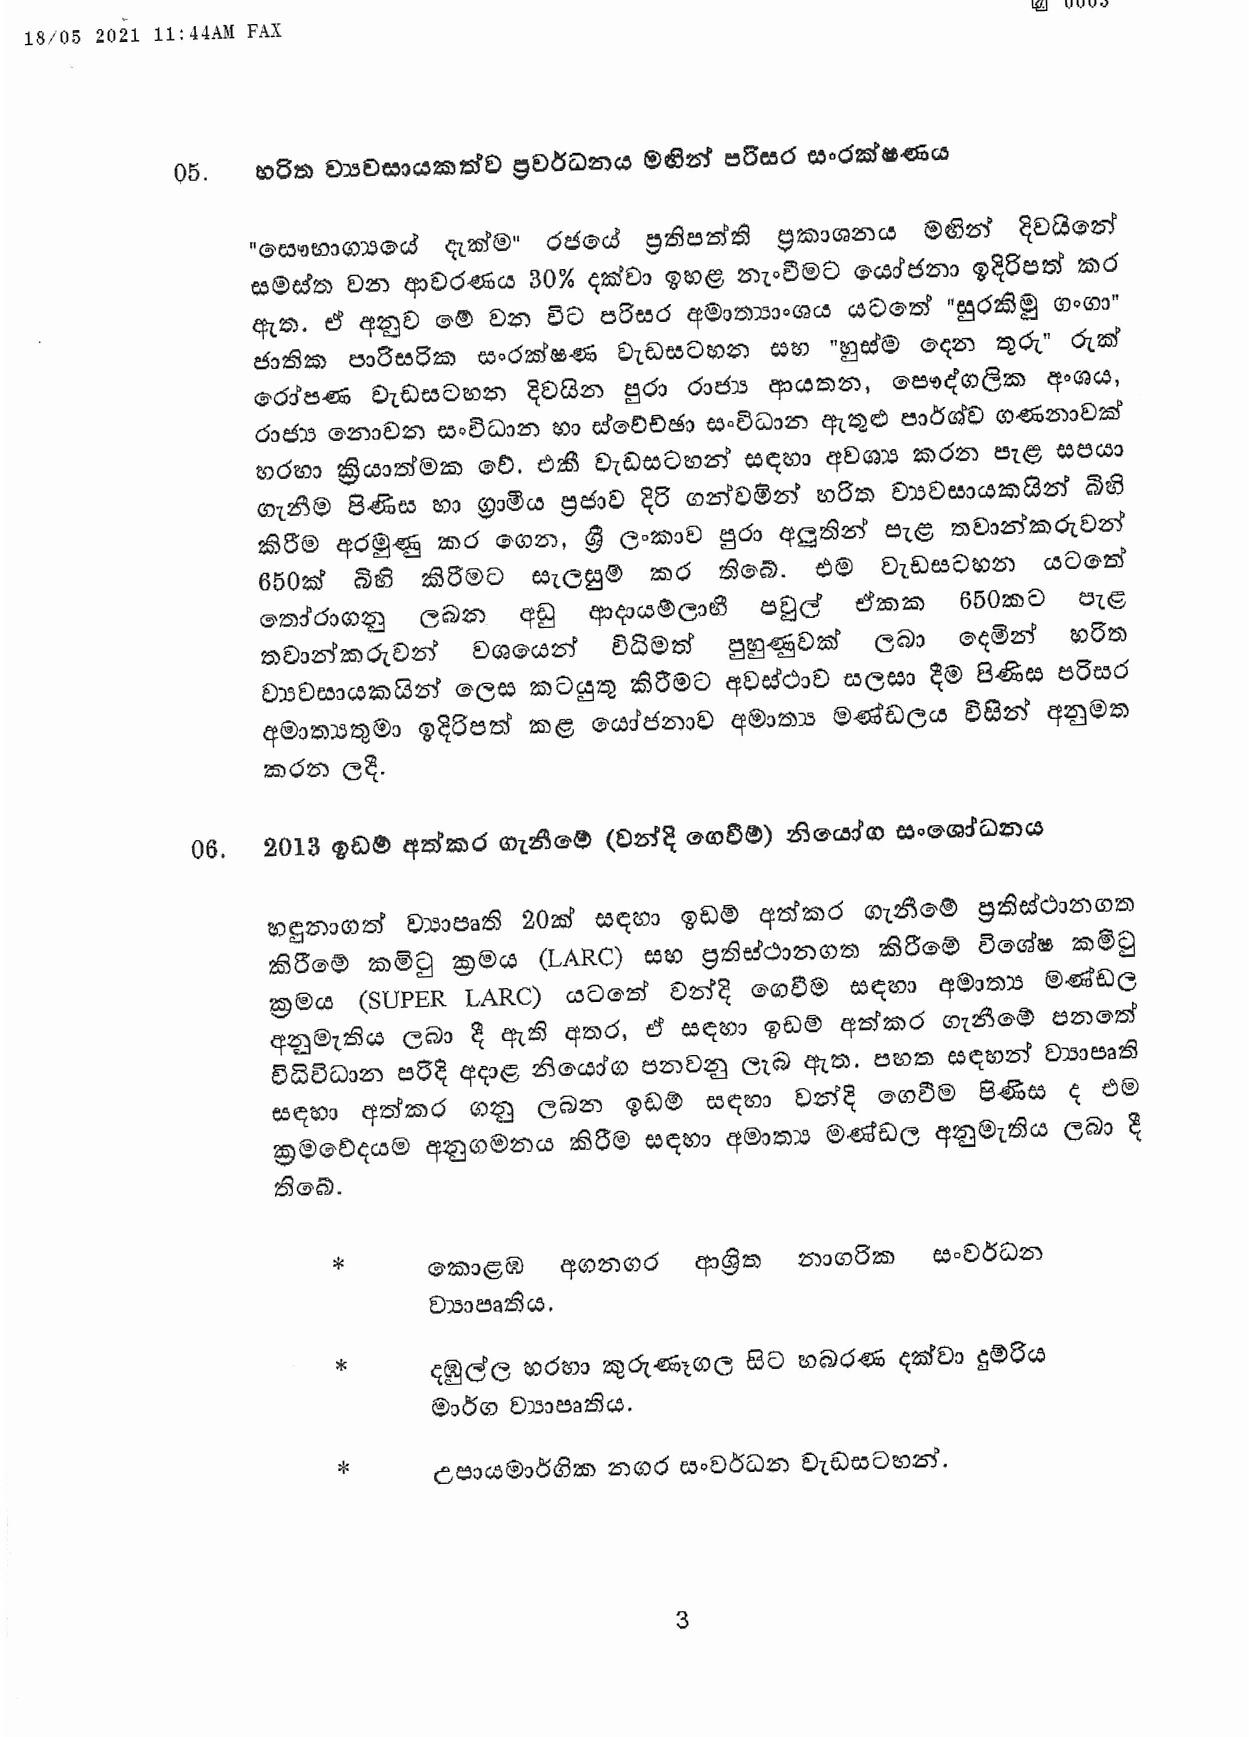 Cabinet Decision on 17.05.2021 page 001